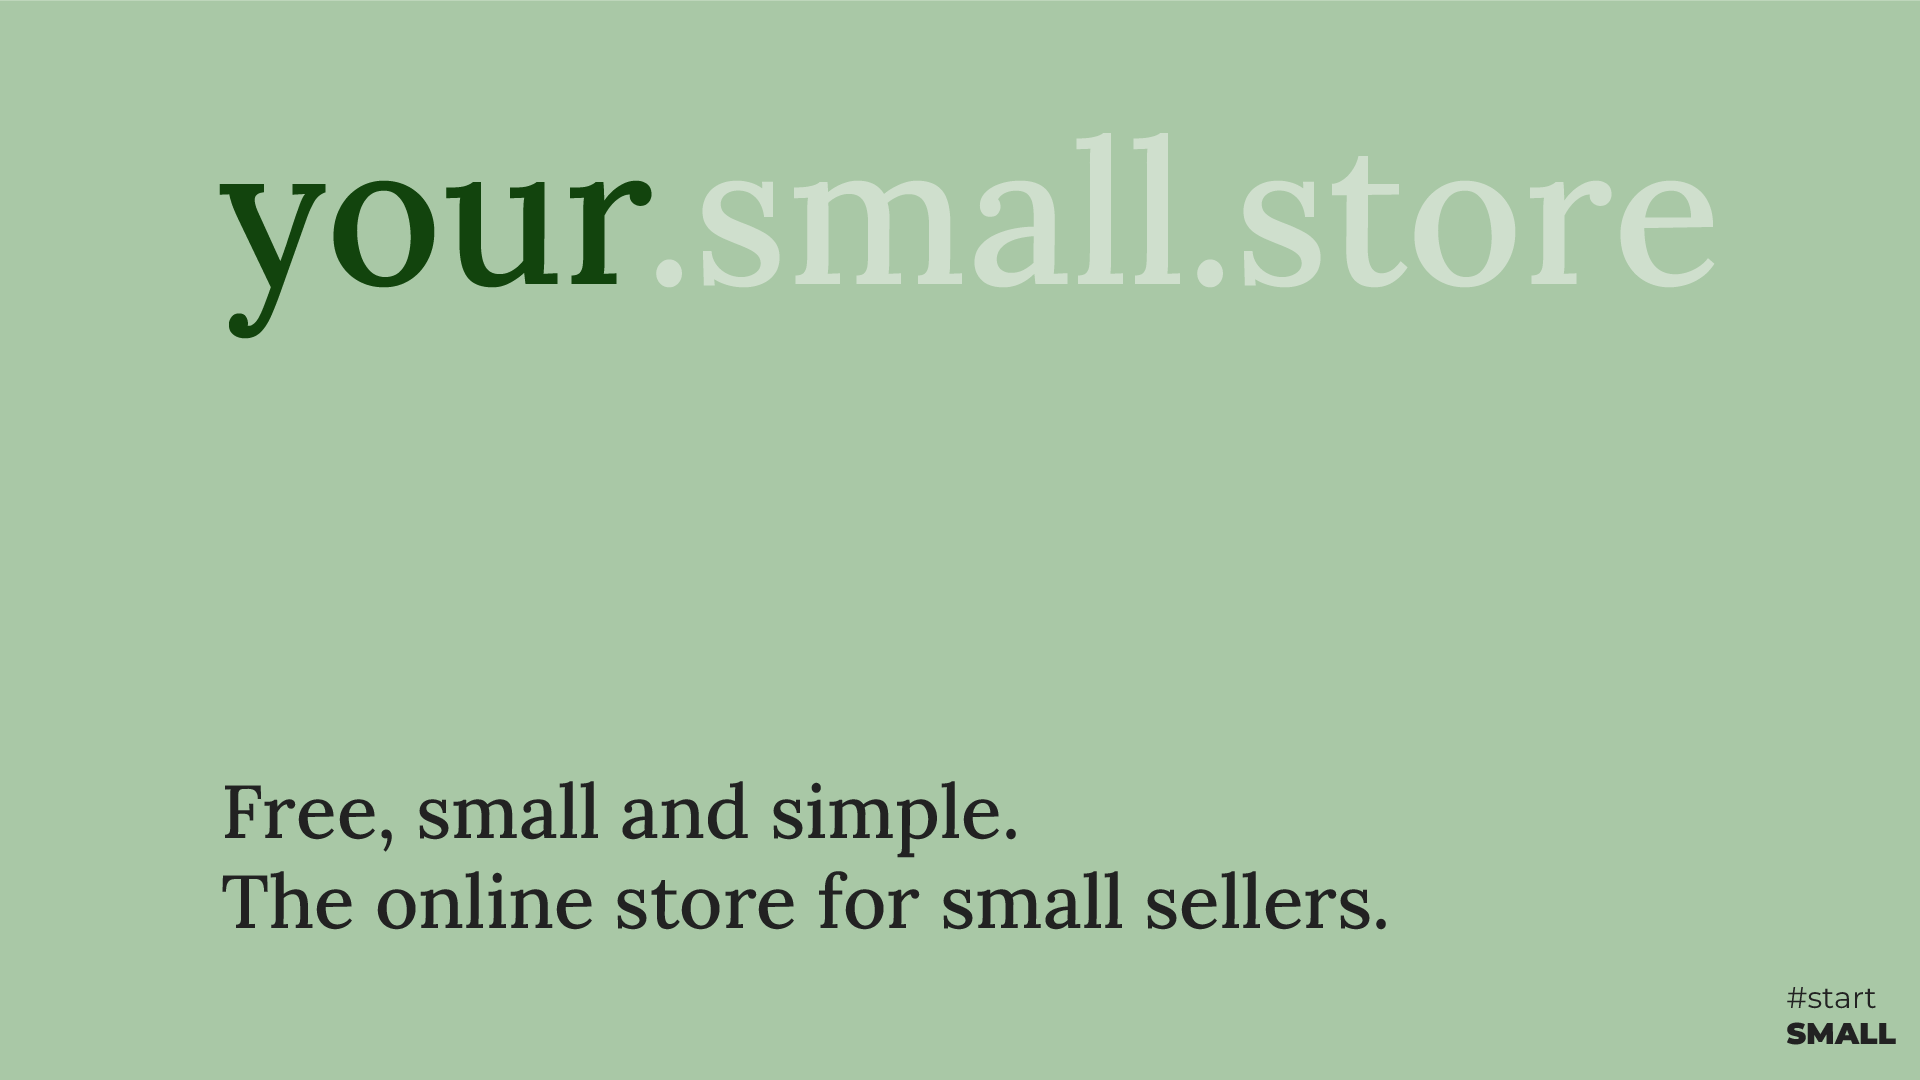 small-store - E-commerce store for small sellers and creators